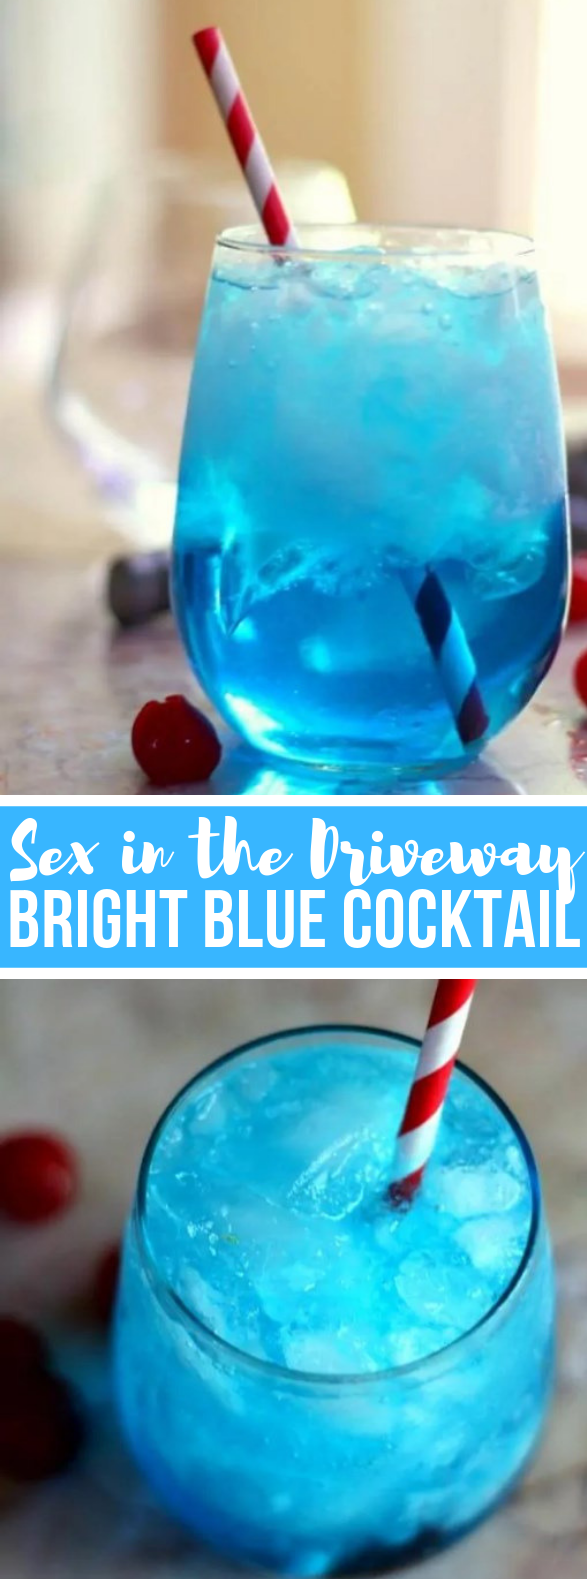 SEX IN THE DRIVEWAY: BRIGHT BLUE COCKTAIL #drink #party